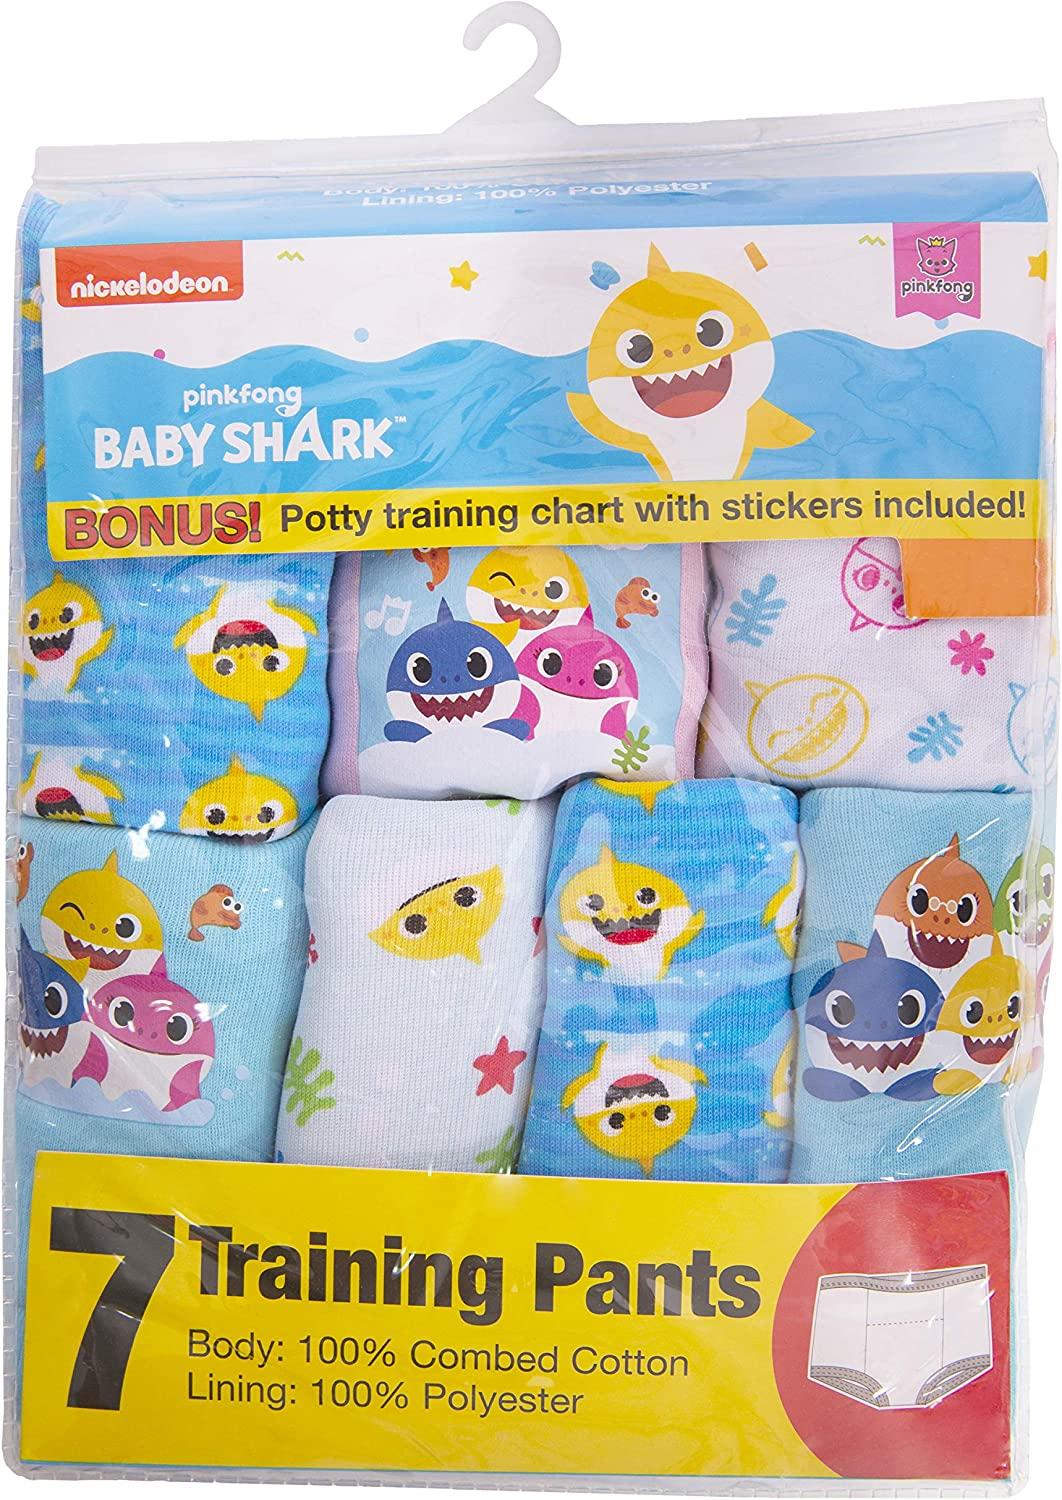 Baby Shark Training Pant Multipacks with Success Tracking Chart & Stickers,  Sizes 18m, 2t, 3t, 4t